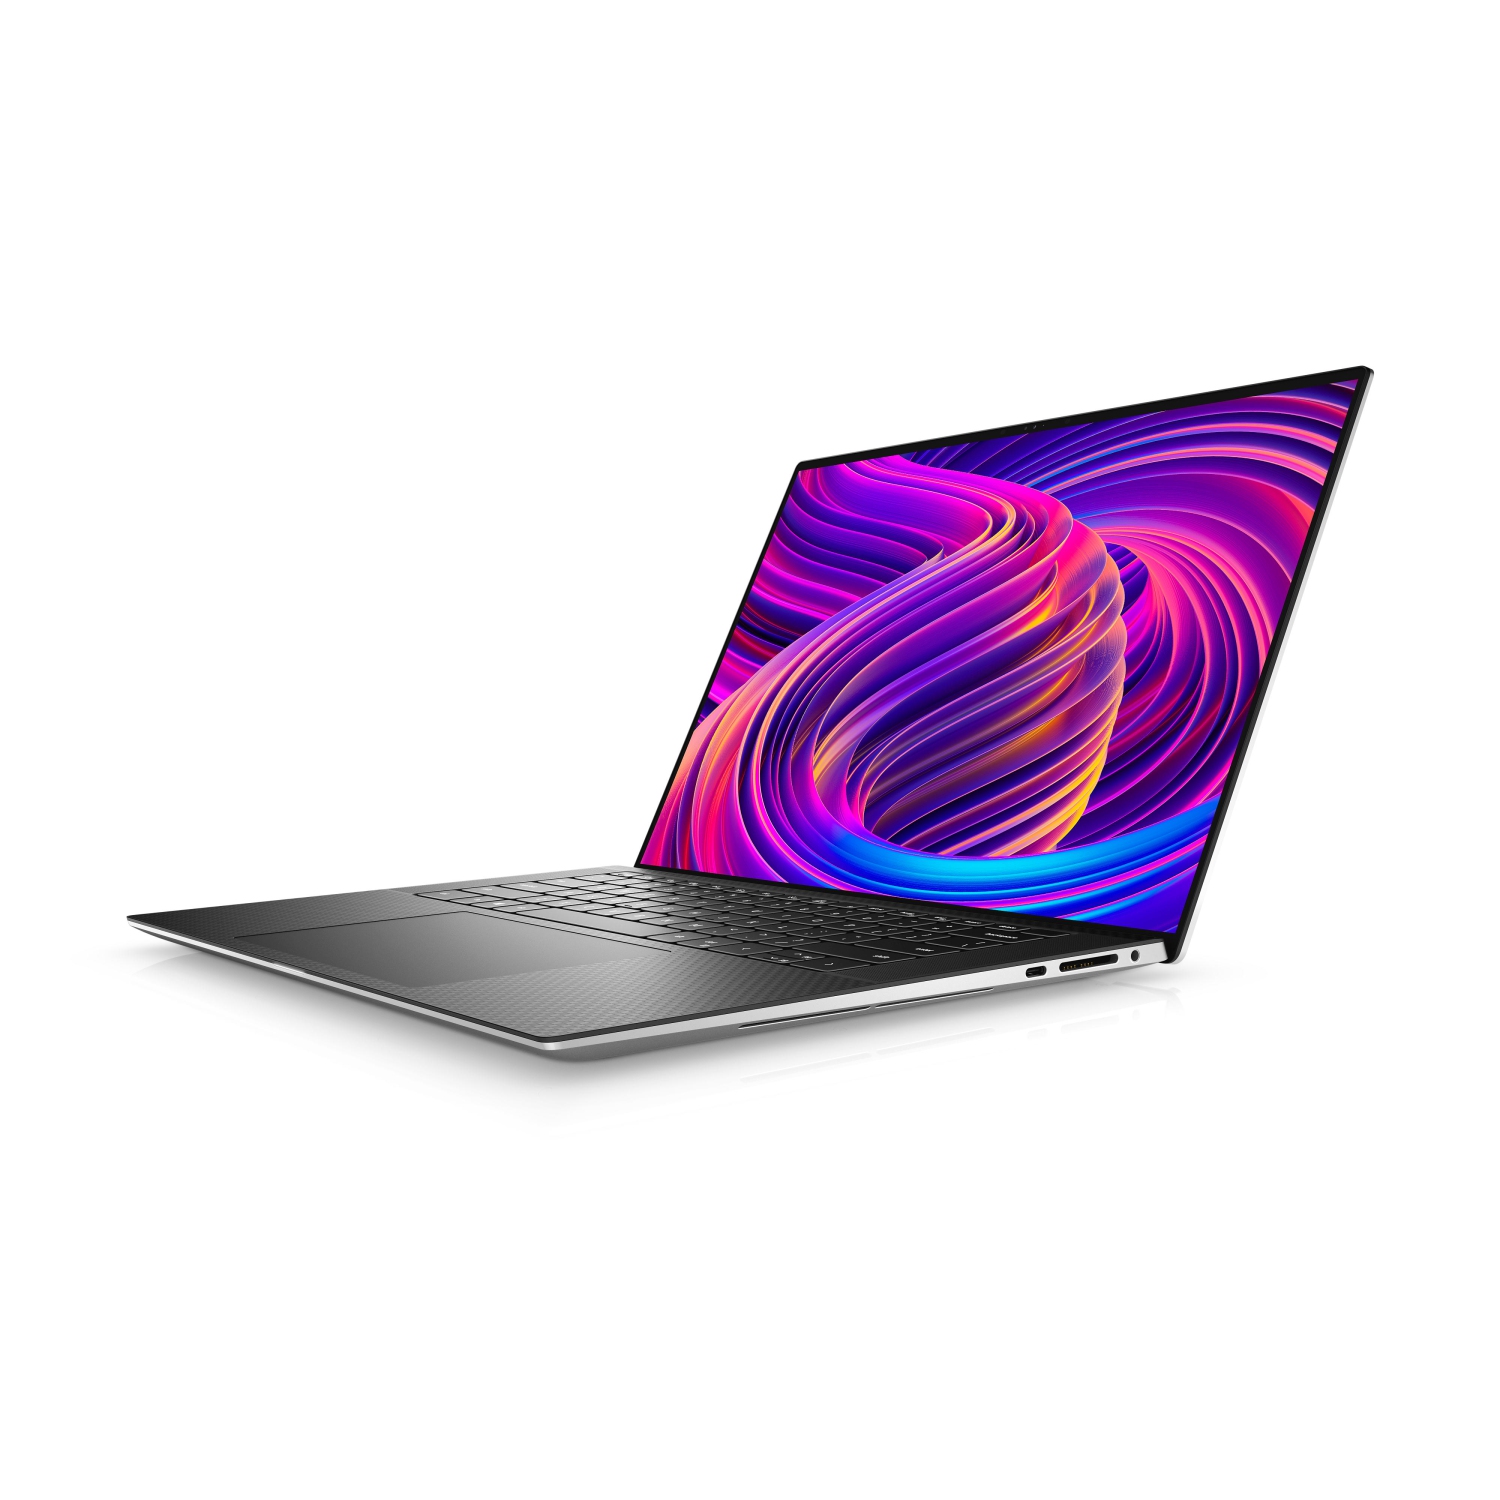 Refurbished (Excellent) - Dell XPS 15 9510 Laptop (2021), 15.6" 4K Touch, Core i7 - 1TB SSD - 32GB RAM - RTX 3050, 8 Cores @ 4.6 GHz - 11th Gen CPU Certified Refurbished